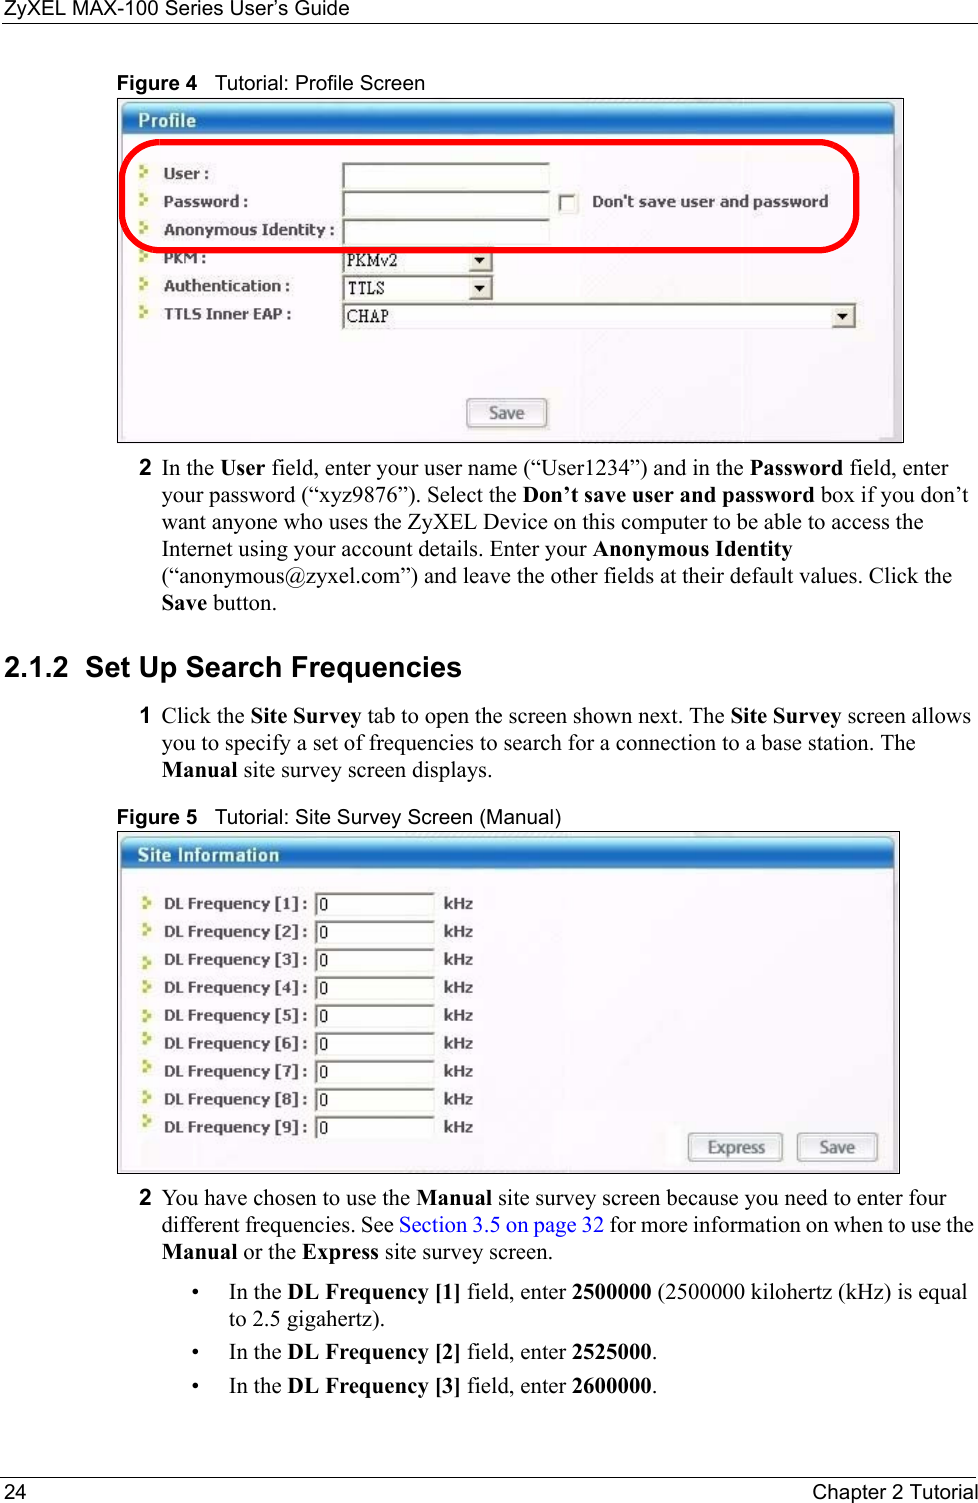 ZyXEL MAX-100 Series User’s Guide24 Chapter 2 TutorialFigure 4   Tutorial: Profile Screen2In the User field, enter your user name (“User1234”) and in the Password field, enter your password (“xyz9876”). Select the Don’t save user and password box if you don’t want anyone who uses the ZyXEL Device on this computer to be able to access the Internet using your account details. Enter your Anonymous Identity (“anonymous@zyxel.com”) and leave the other fields at their default values. Click the Save button.2.1.2  Set Up Search Frequencies1Click the Site Survey tab to open the screen shown next. The Site Survey screen allows you to specify a set of frequencies to search for a connection to a base station. The Manual site survey screen displays.Figure 5   Tutorial: Site Survey Screen (Manual)2You have chosen to use the Manual site survey screen because you need to enter four different frequencies. See Section 3.5 on page 32 for more information on when to use the Manual or the Express site survey screen.•In the DL Frequency [1] field, enter 2500000 (2500000 kilohertz (kHz) is equal to 2.5 gigahertz).•In the DL Frequency [2] field, enter 2525000.•In the DL Frequency [3] field, enter 2600000.